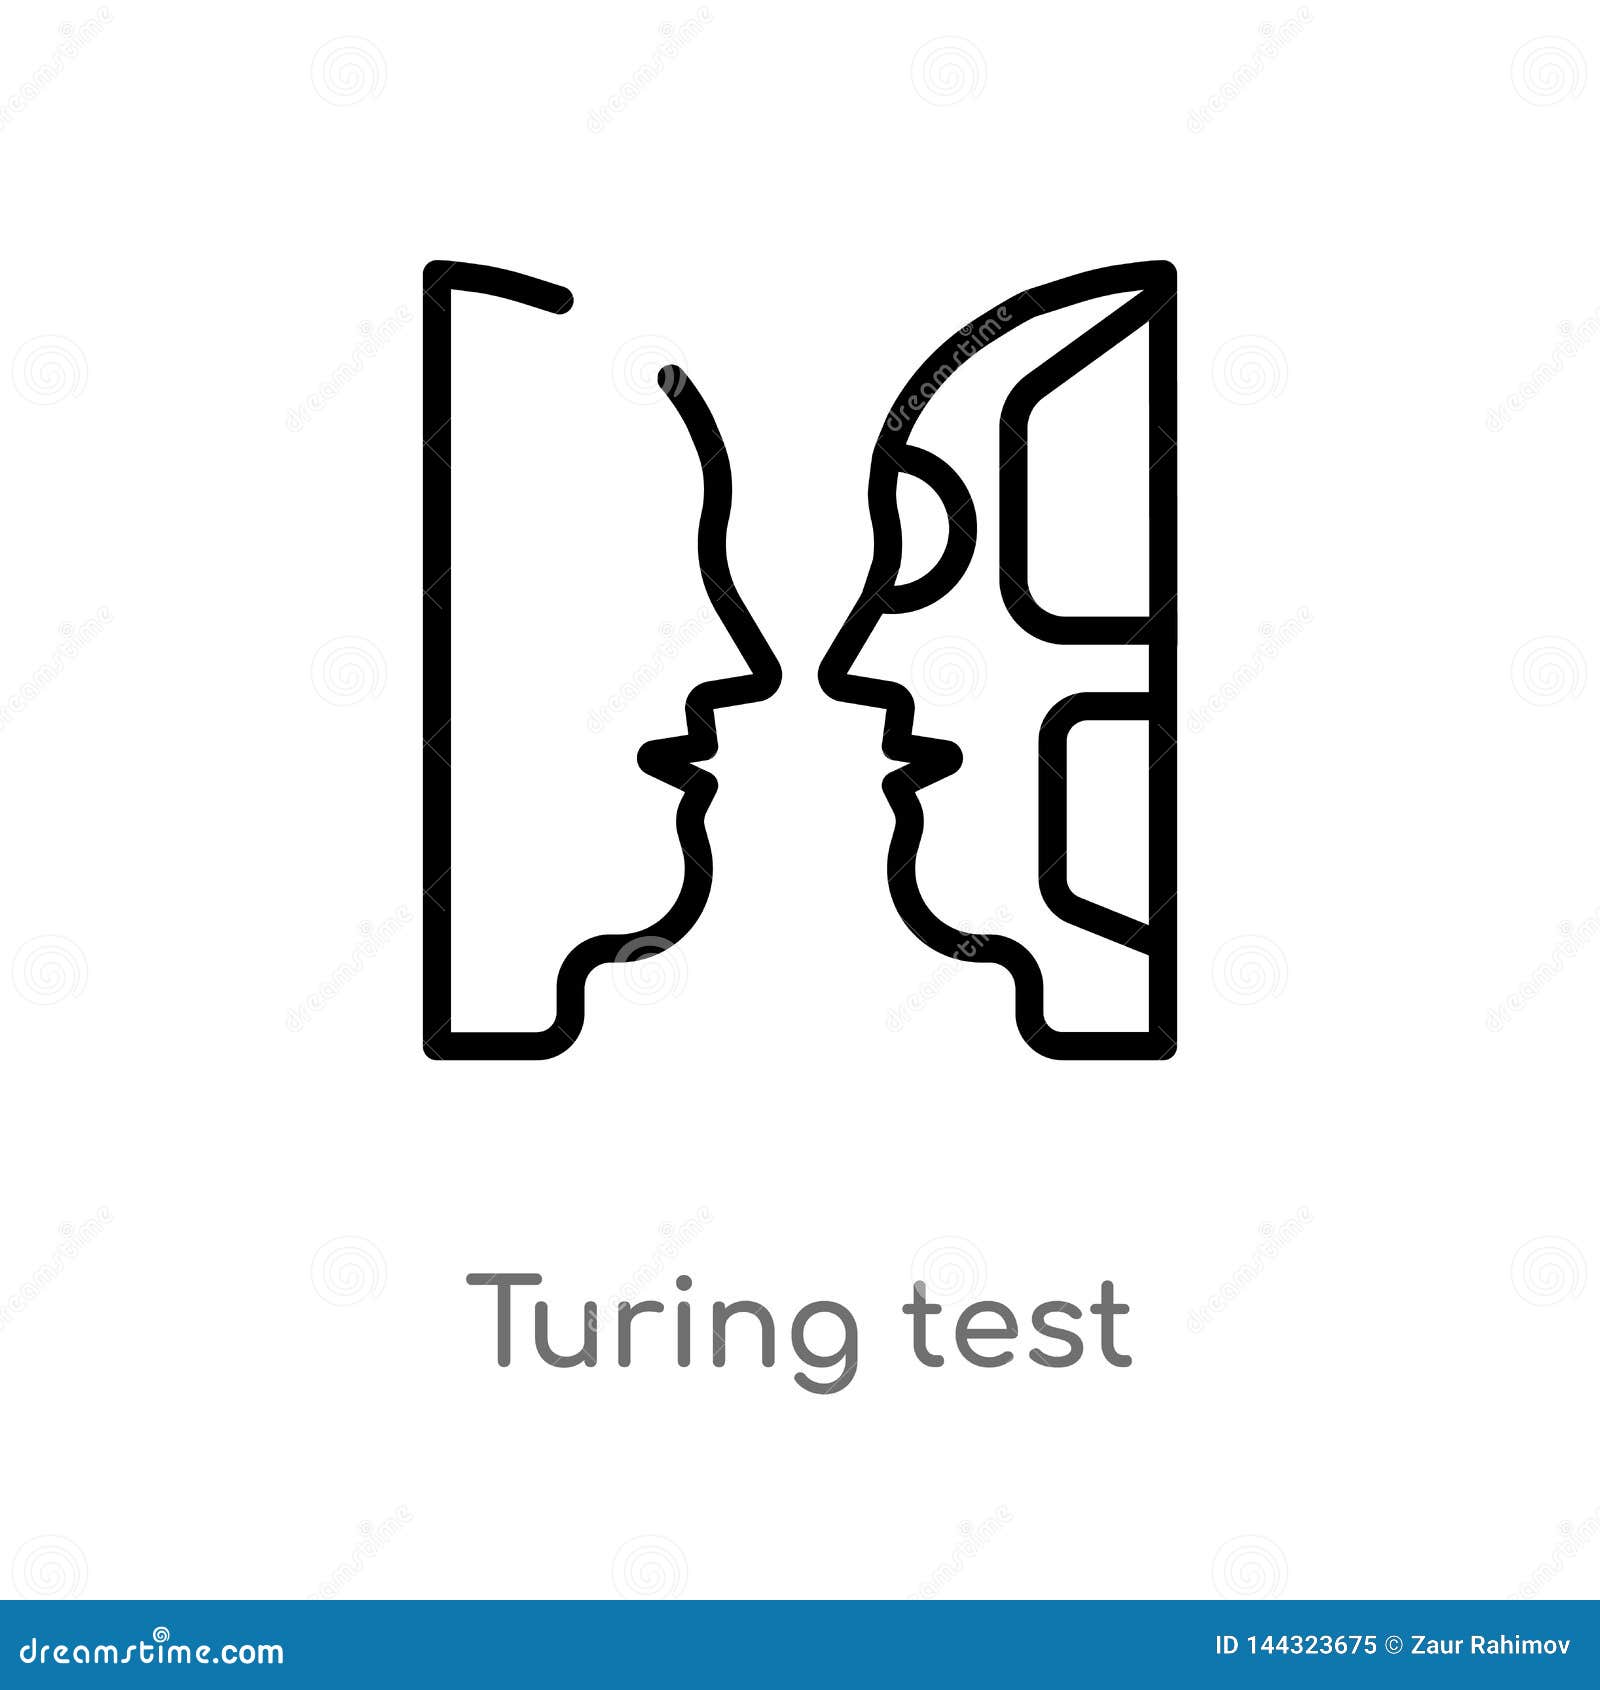 Test turing The Turing